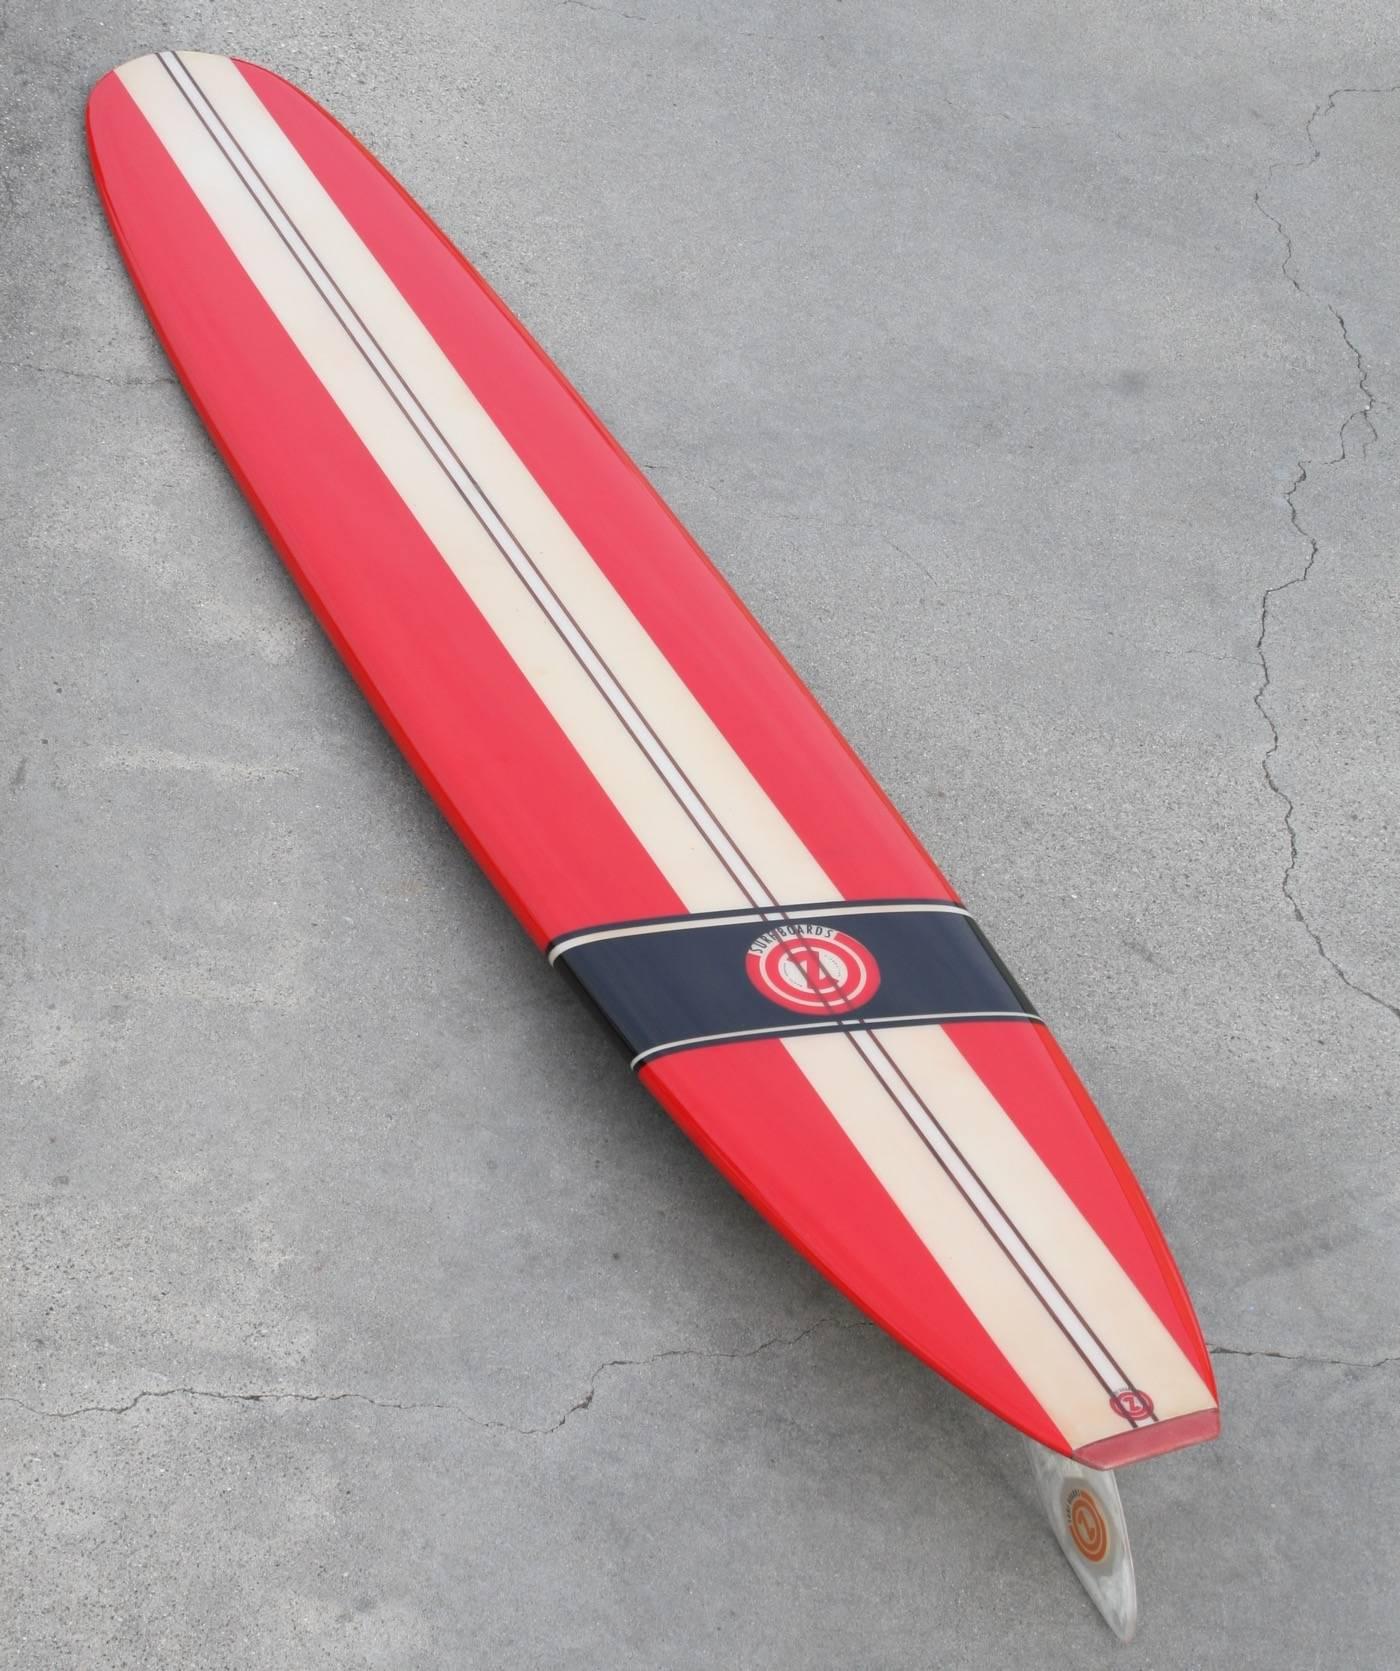 Made in Santa Monica California in the mid-1960s this fully restored, 9 foot 3 inch, Con surfboard is simply stunning. Brilliant red is accented with wide creamy white horizontal stripes with a deep ebony diagonal stripe anchoring the Classic Con